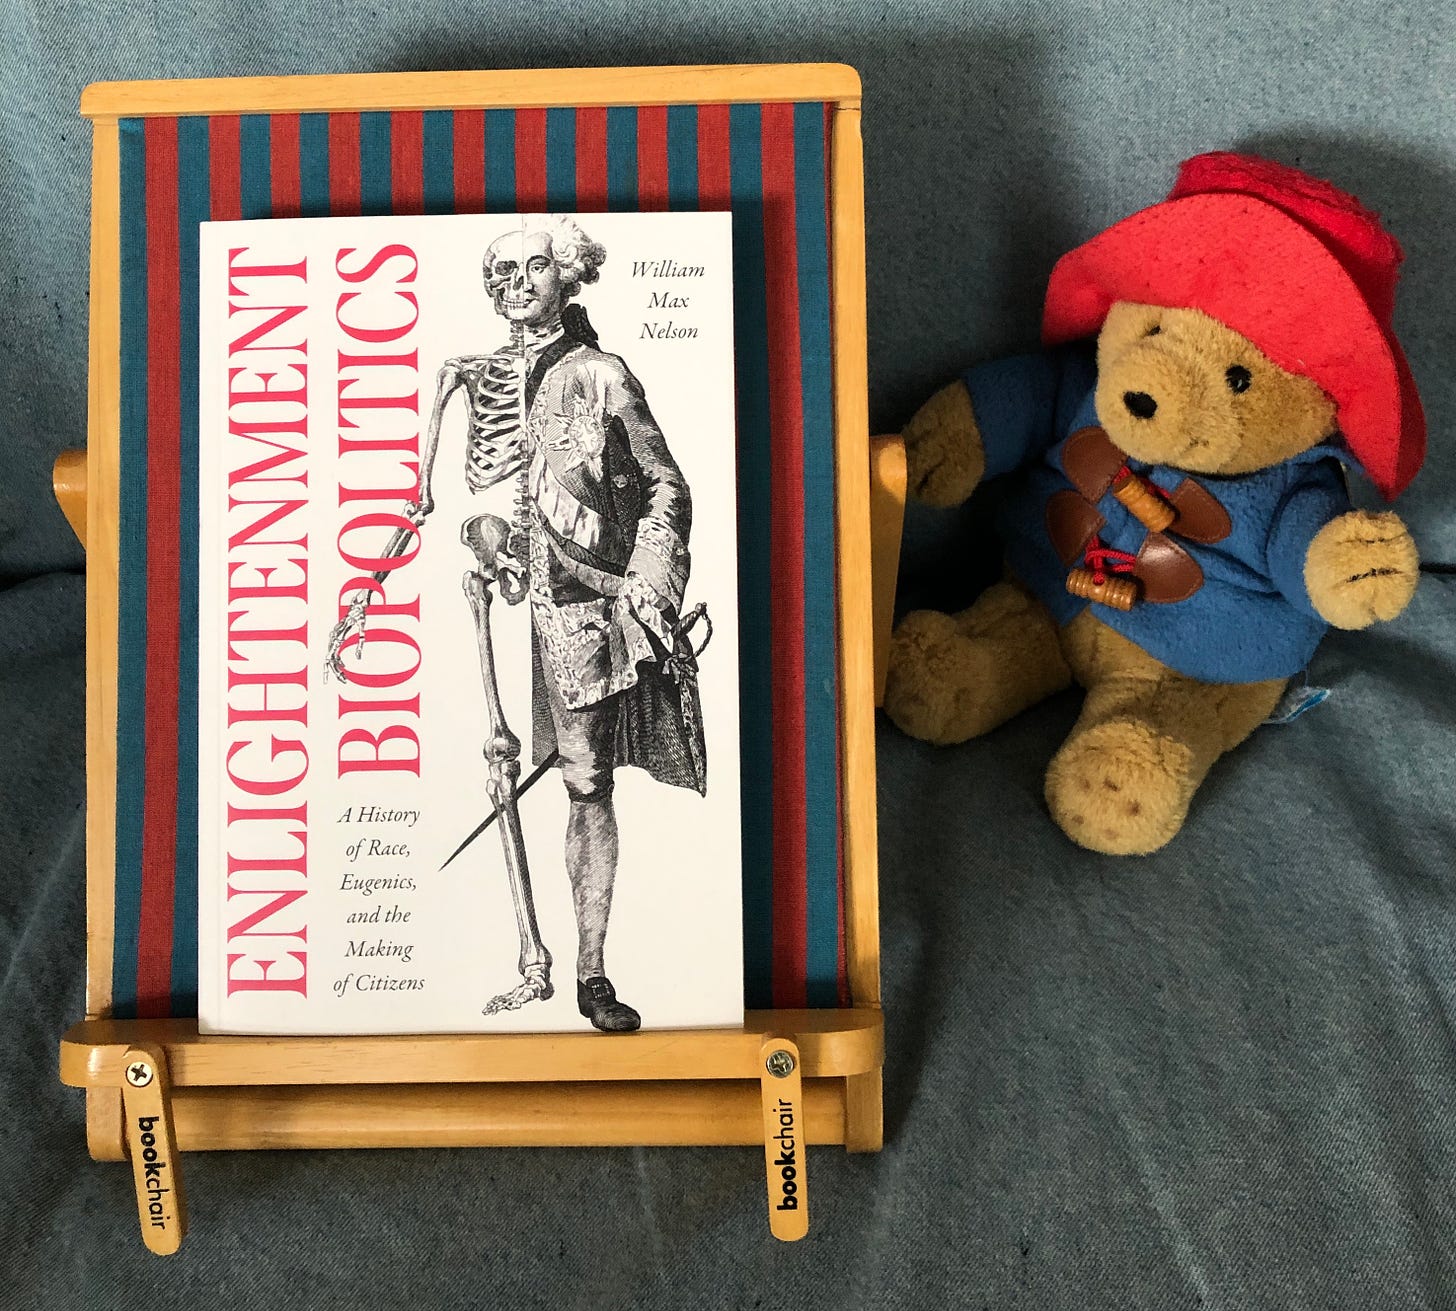 Book on a bookchair next to Paddington Bear in his usual floppy hat and duffle coat.